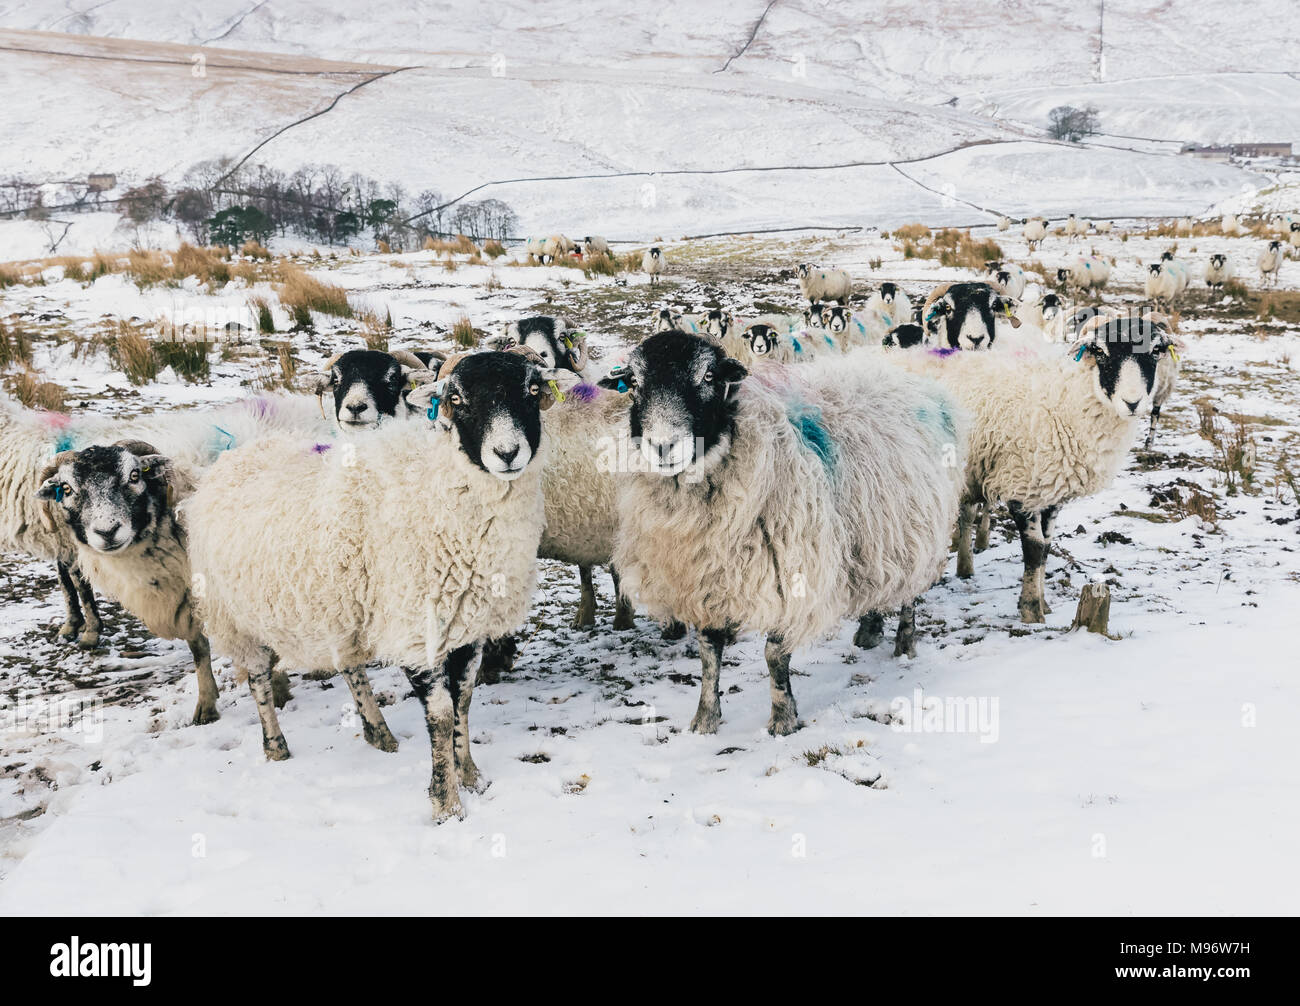 Swaledale Sheep in the Yorkshire Dales, England, UK during winter.  Snowy, winter scene.  Pretty ewes with eartags. Landscape Stock Photo